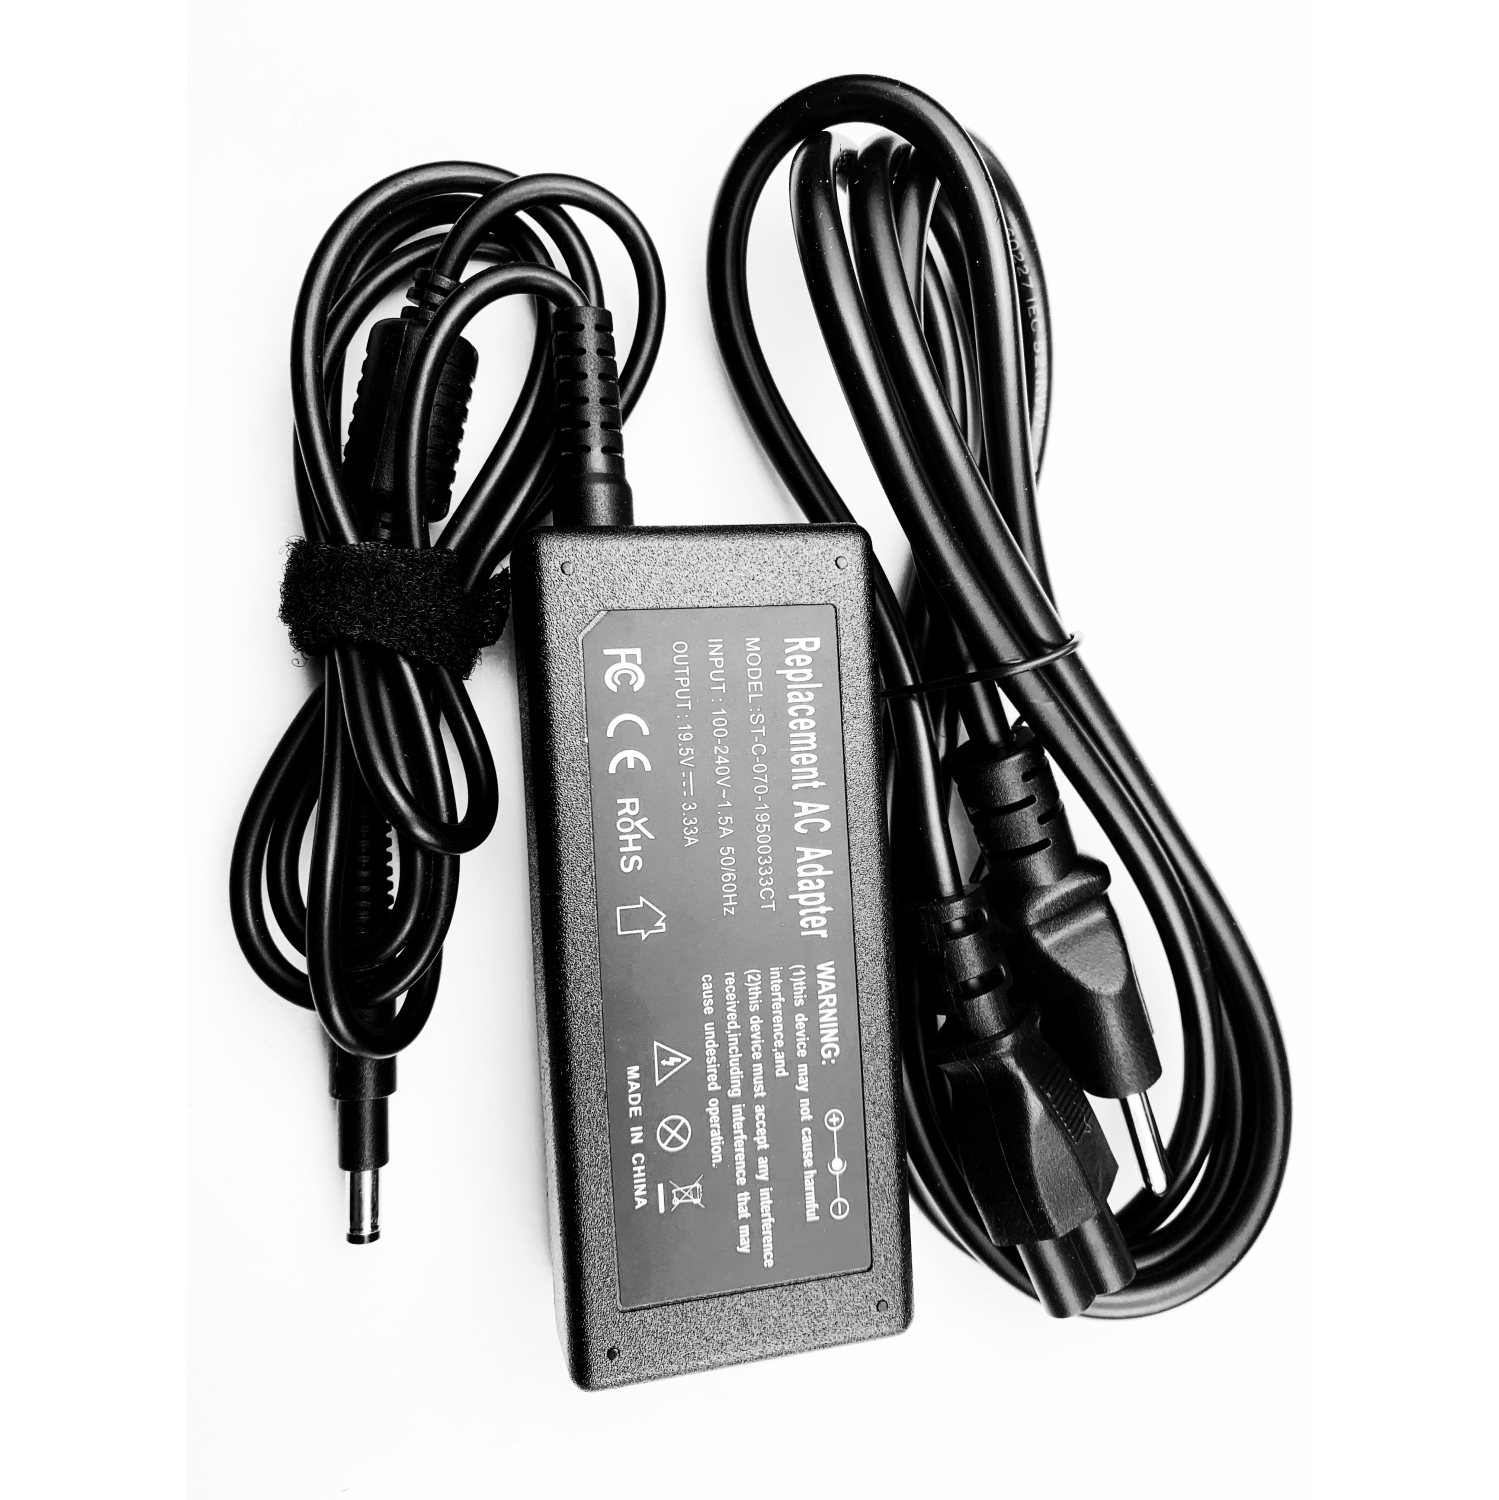 19.5V 65W 4.75mm x 1.7mm new AC adapter power cord charger for HP Envy 14-b120dx 15 15-b000